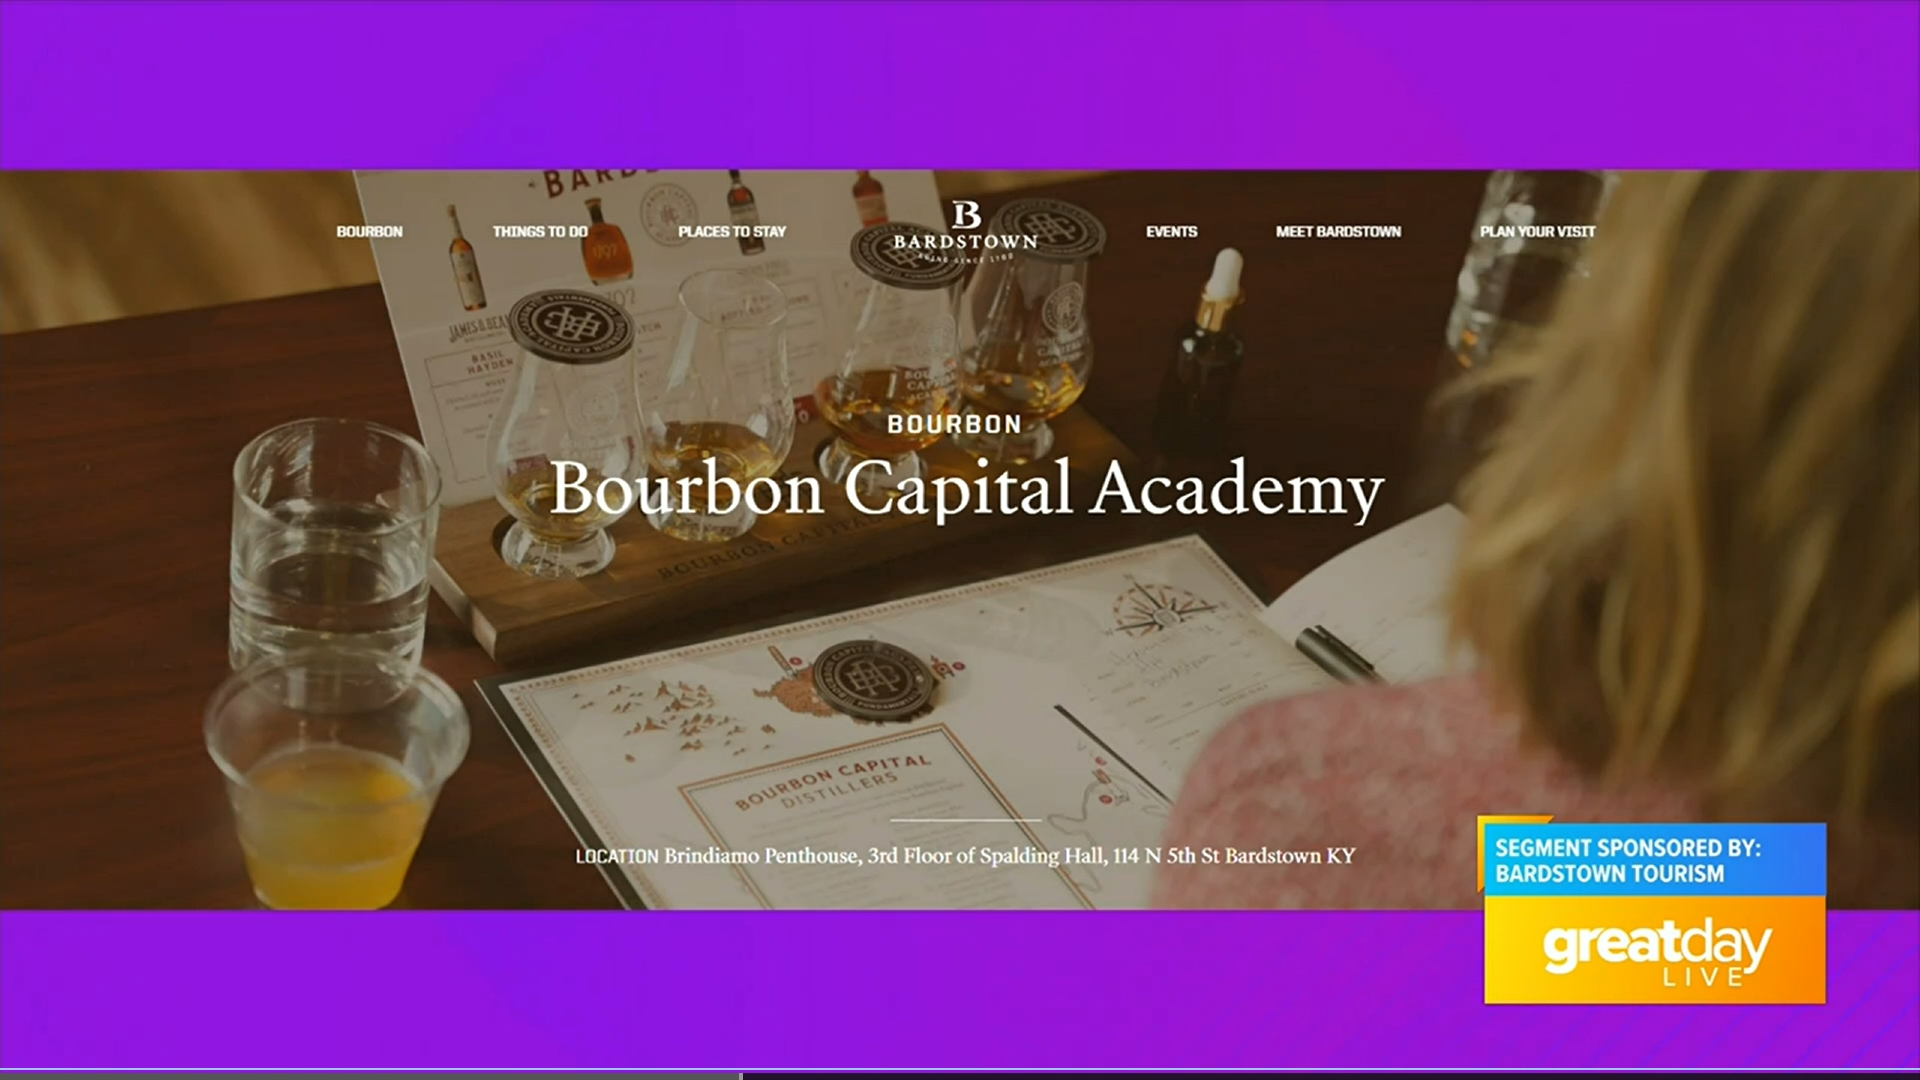 Bourbon Capital Academy is working hard to provide guests with a unique bourbon tasting experience during National Bourbon Week.